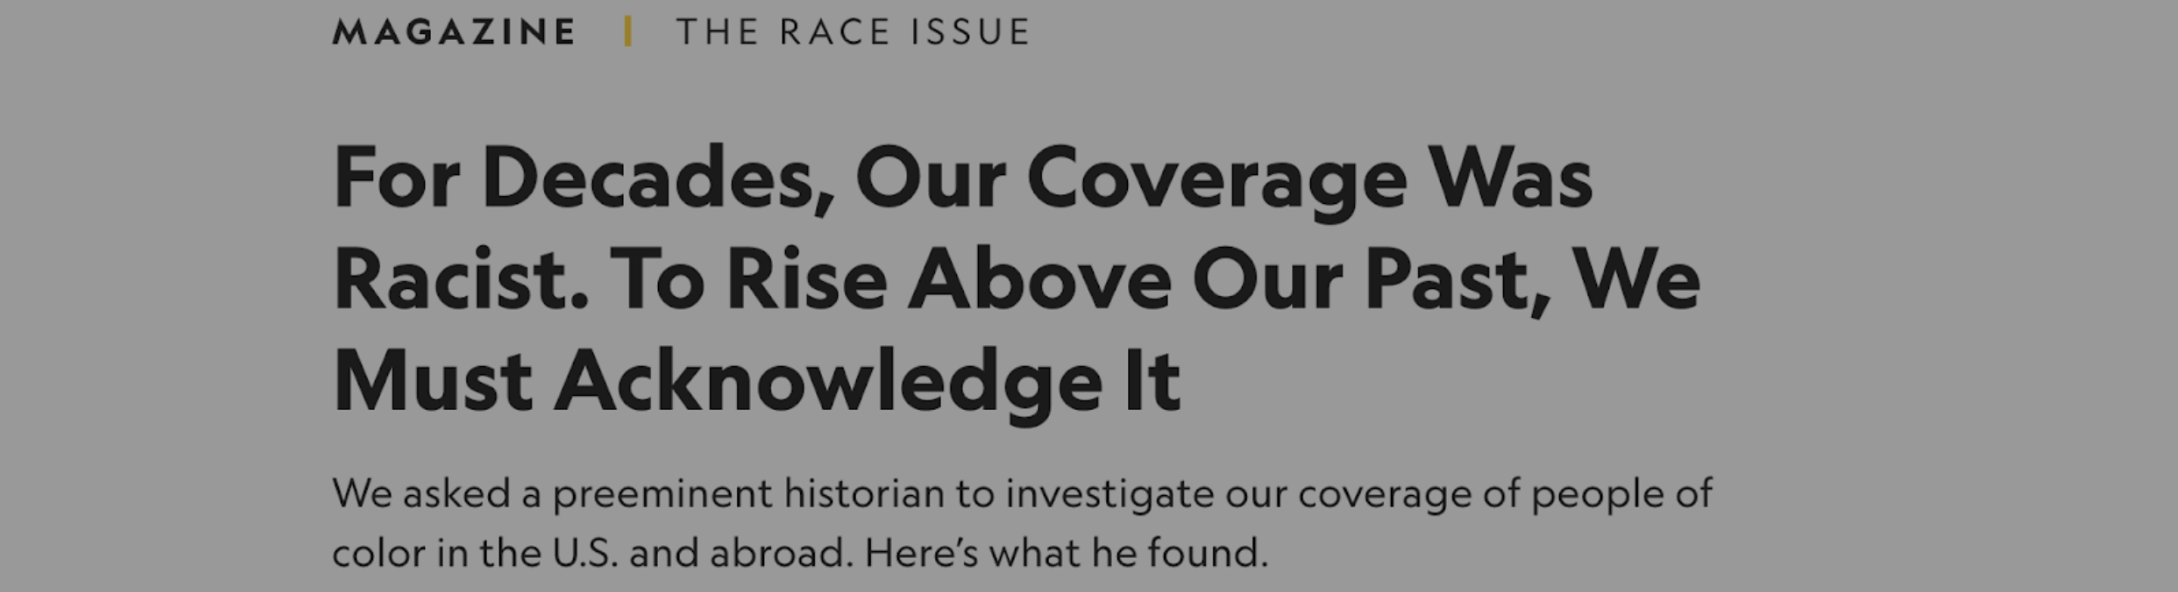 screenshot of National Geographic website with headline "For Decades, Our Coverage Was Racist. To Rise Above Our Past, We Must Acknowledge It."